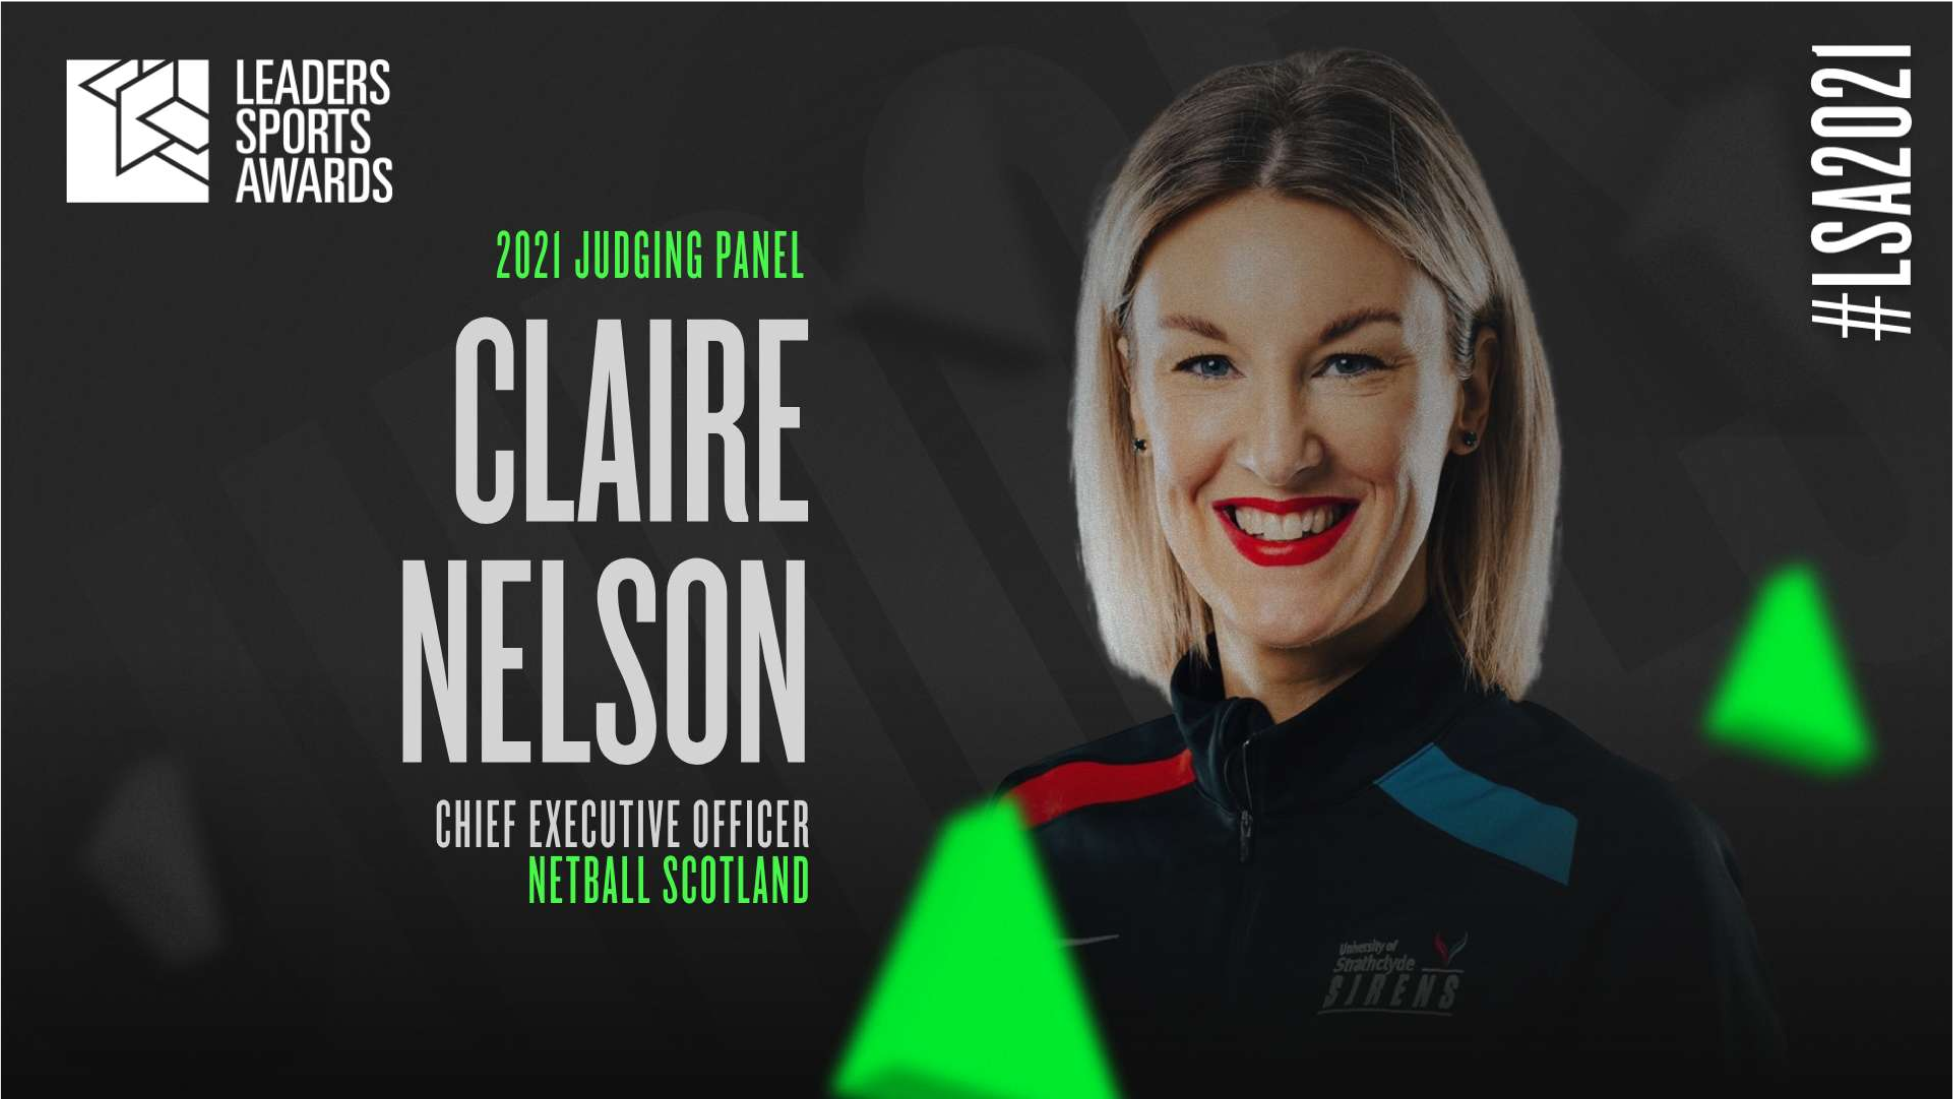 Leaders Sports Awards 2021 Judge Claire Nelson